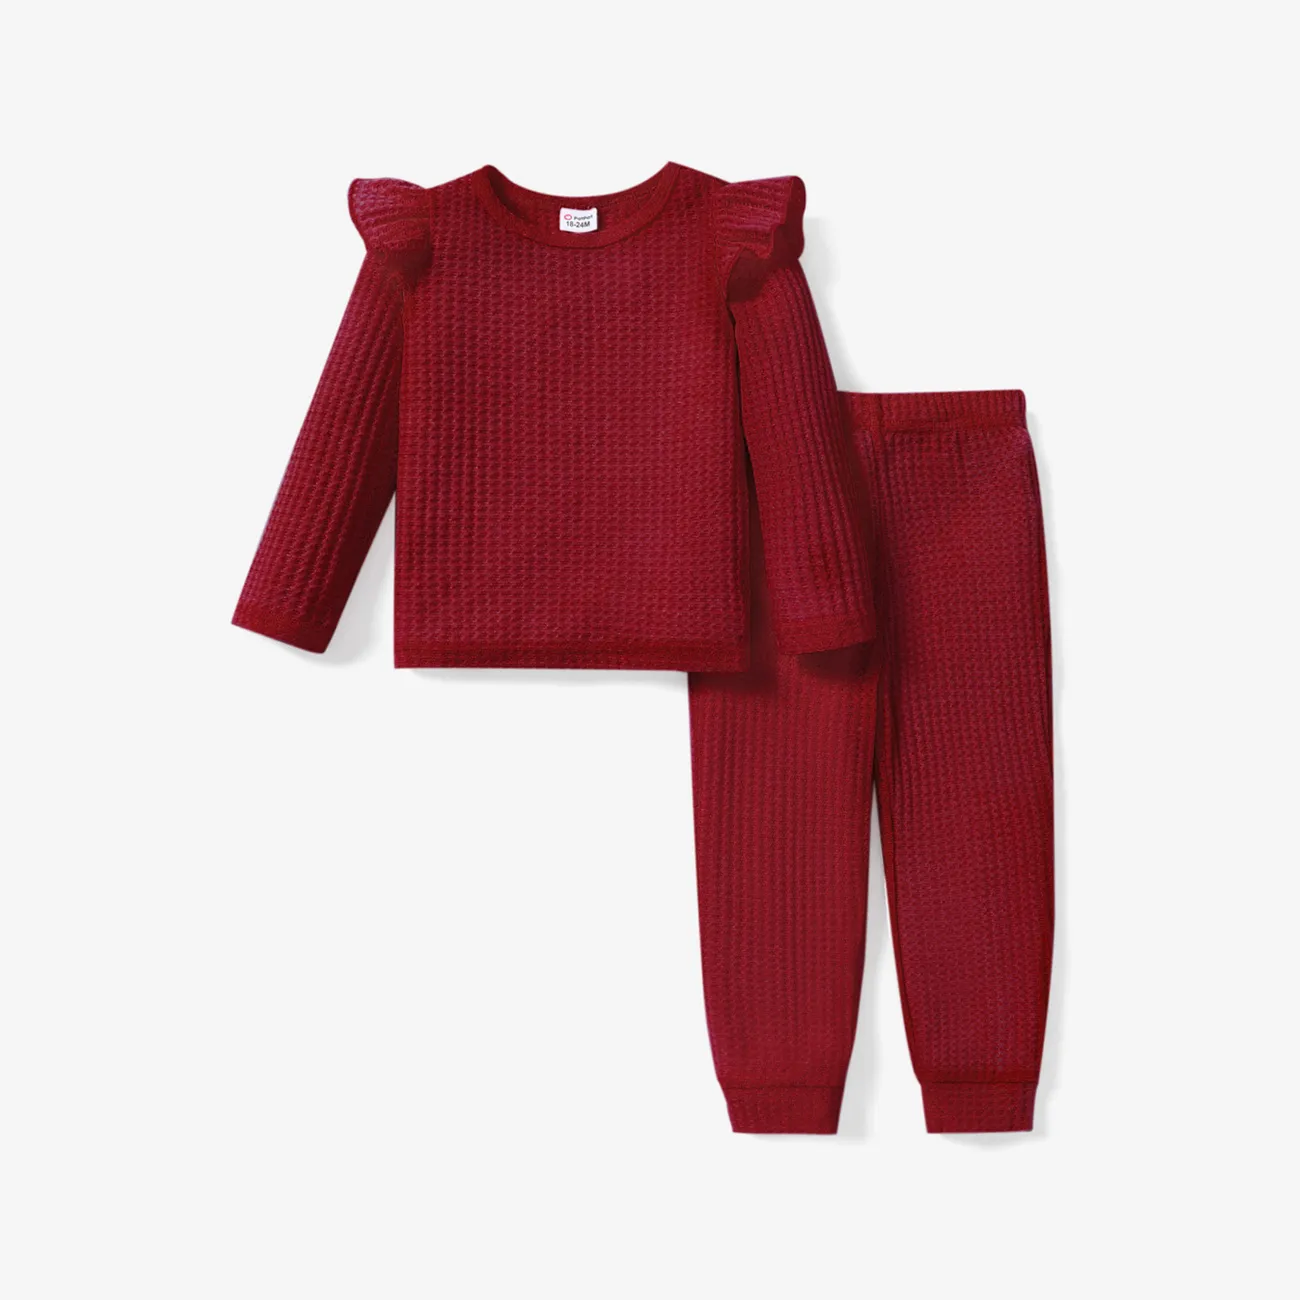 2-piece Toddler Girl Ruffled Textured Long-sleeve Top and Solid Color Pants Set Burgundy big image 1